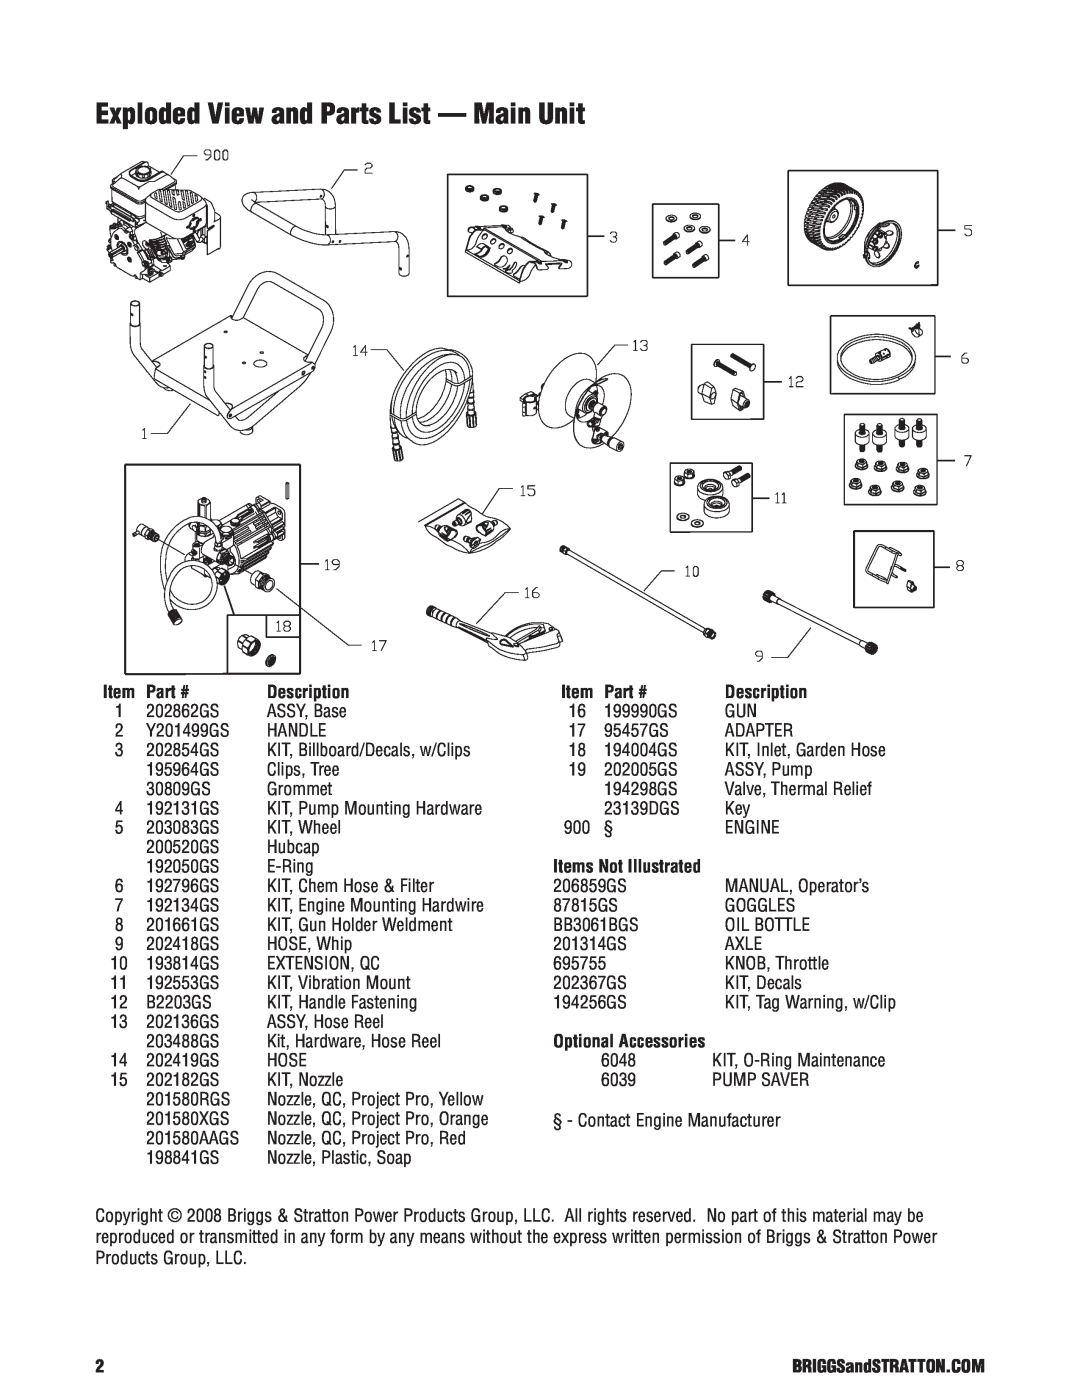 Briggs & Stratton 020364-1 manual Exploded View and Parts List - Main Unit, Description 